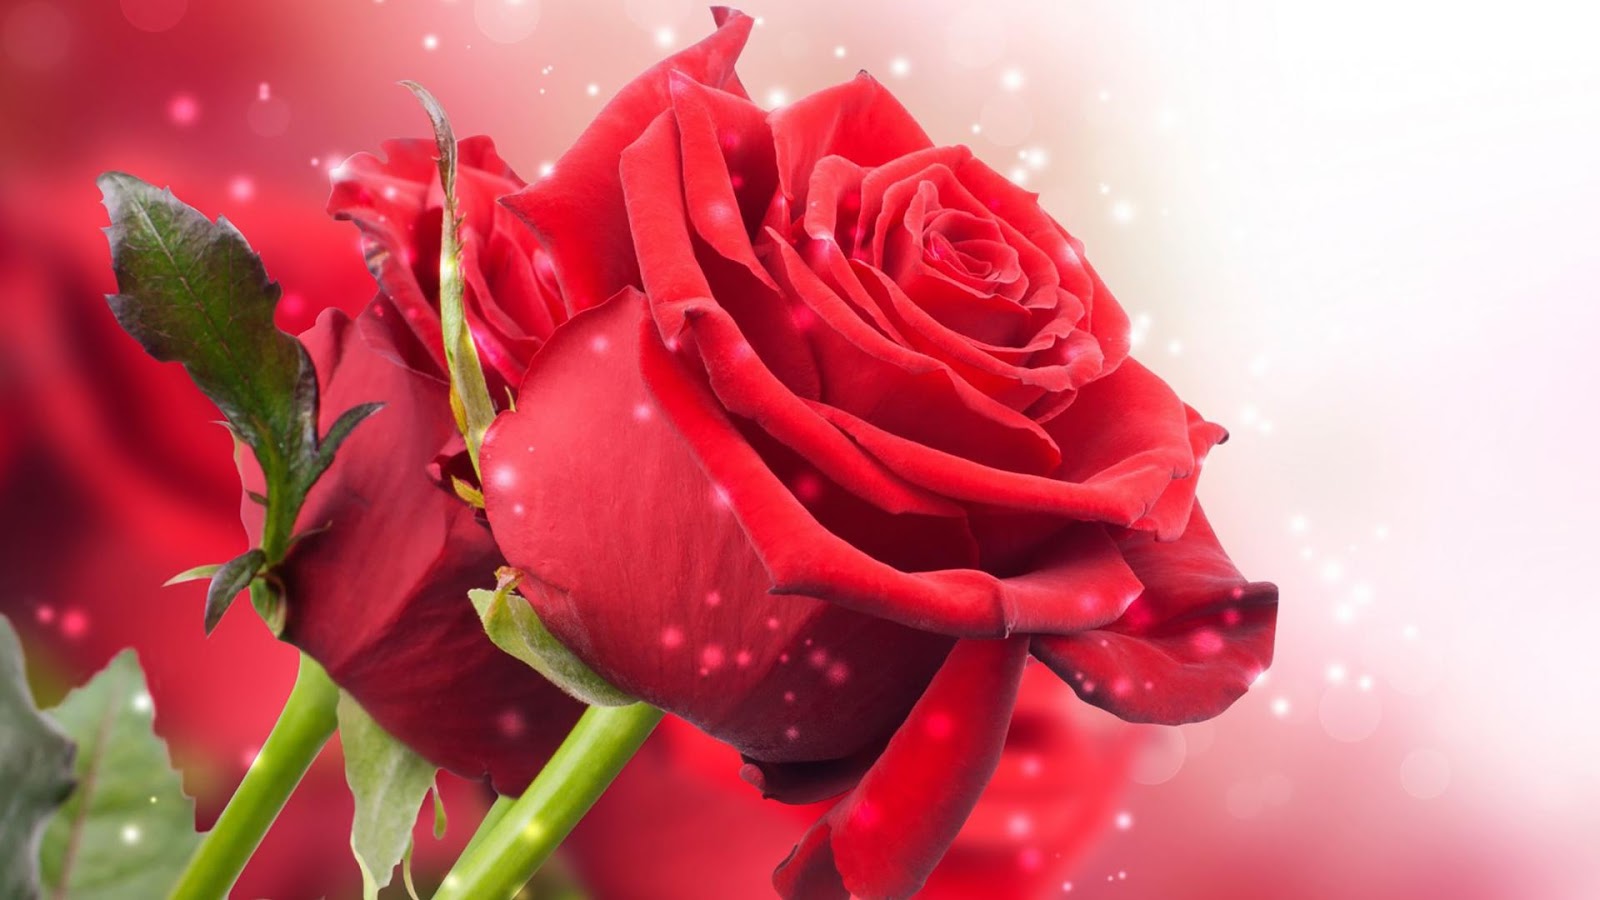 Collection of beautiful roses wallpaper - Rose wallpaper